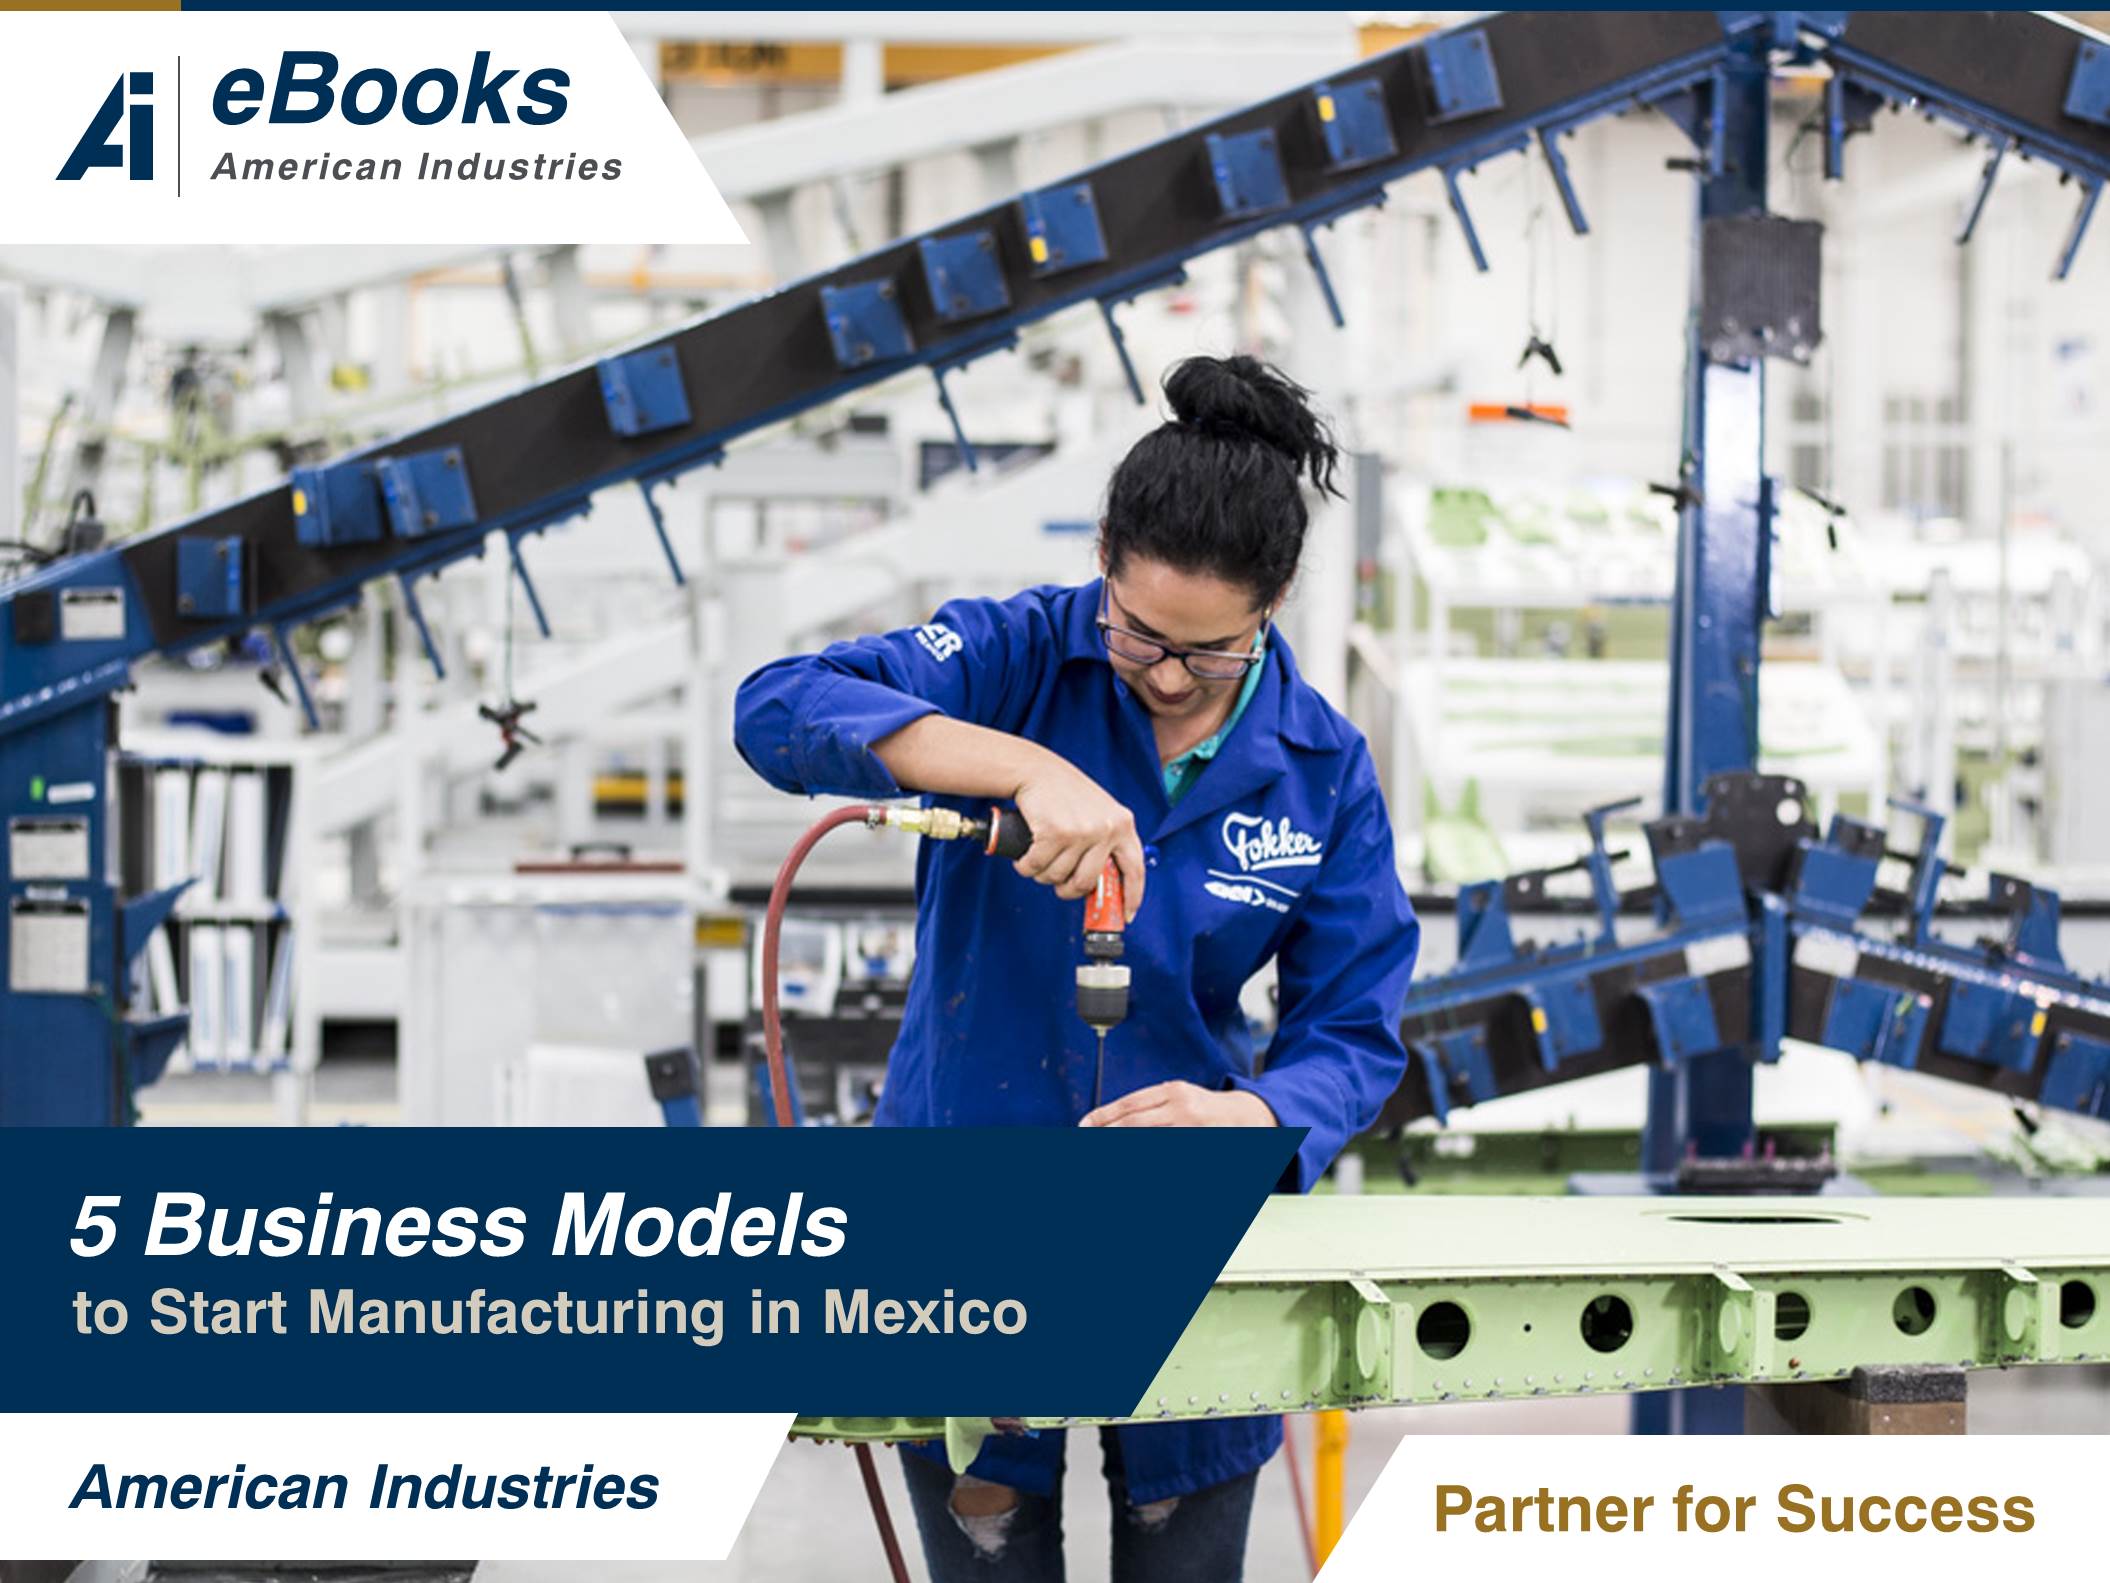 5 business models to start manufacturing in Mexico